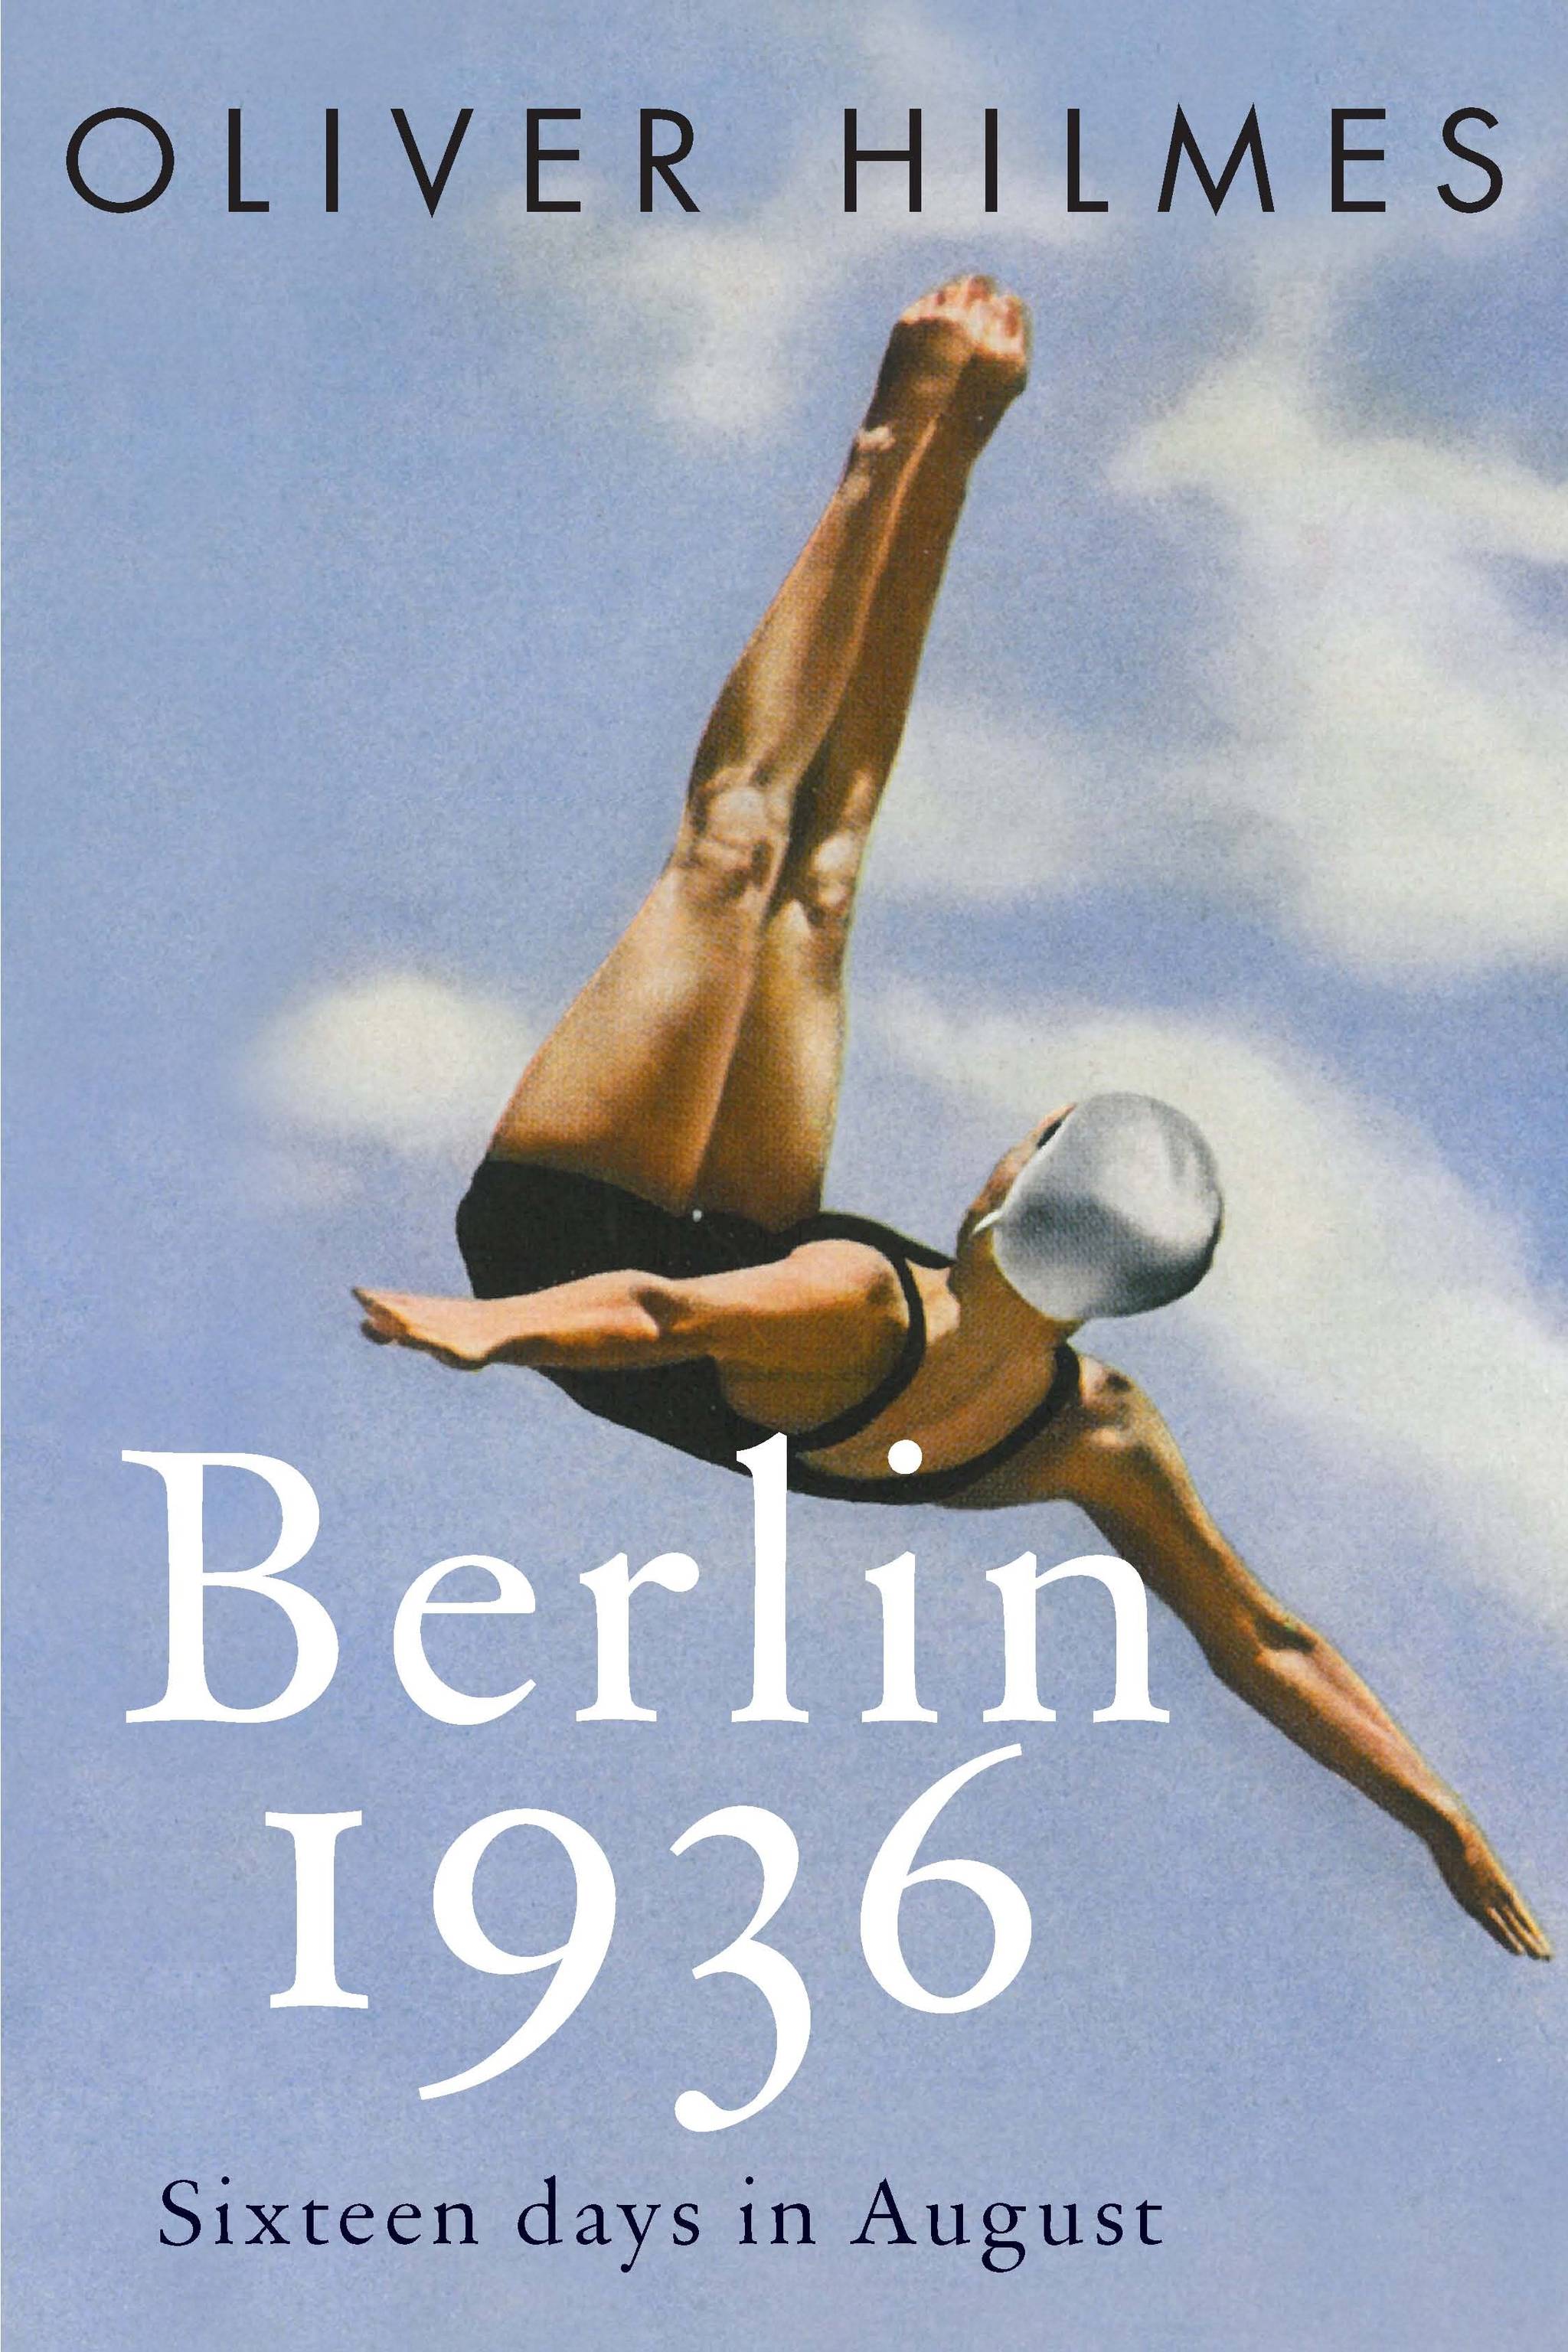 The Bookworm Sez: So much more to the story in ‘Berlin 1936’